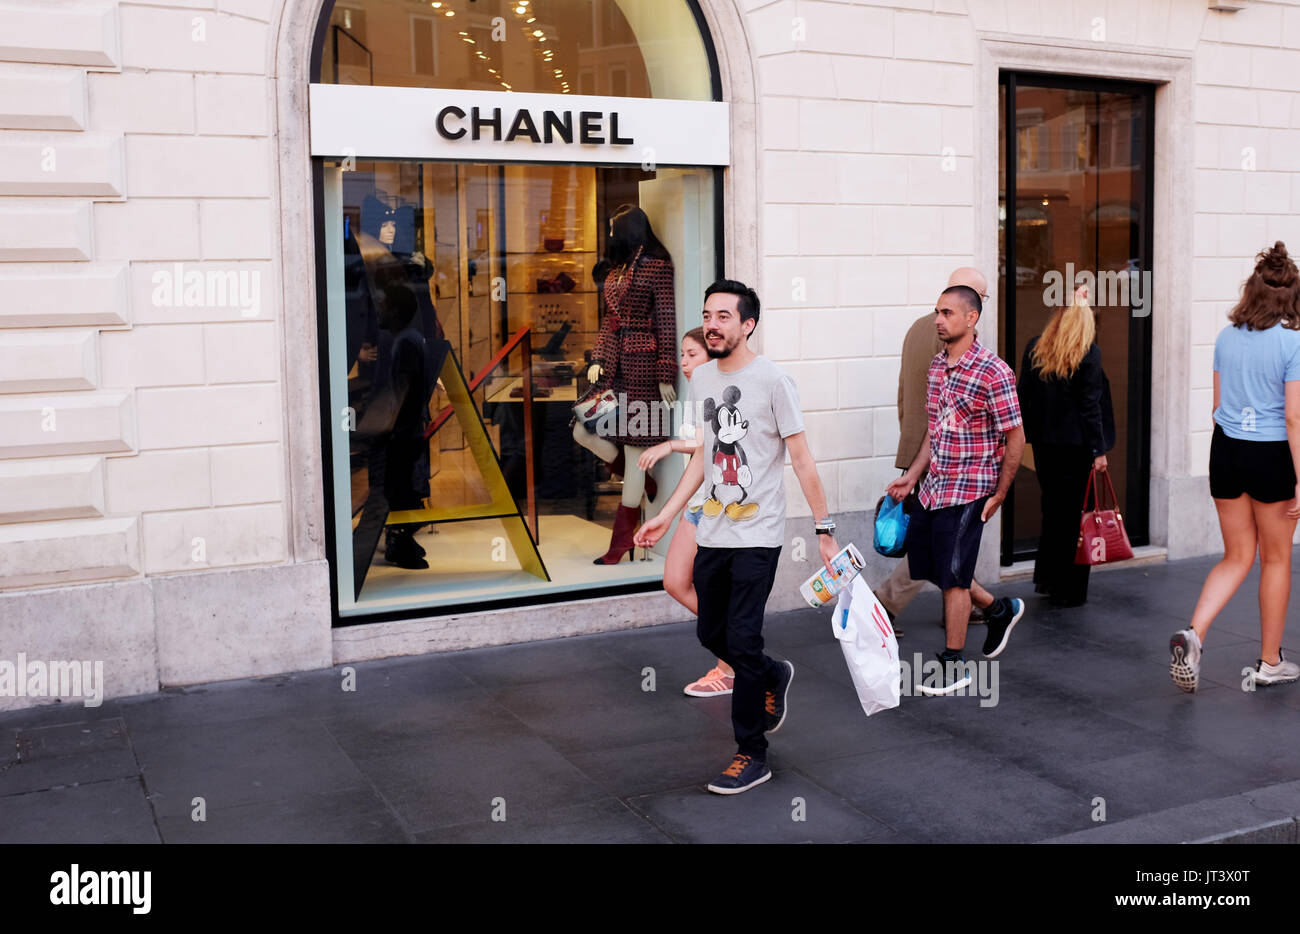 Rome Italy July 2017 - Shoppers pass by the famous Chanel shop in